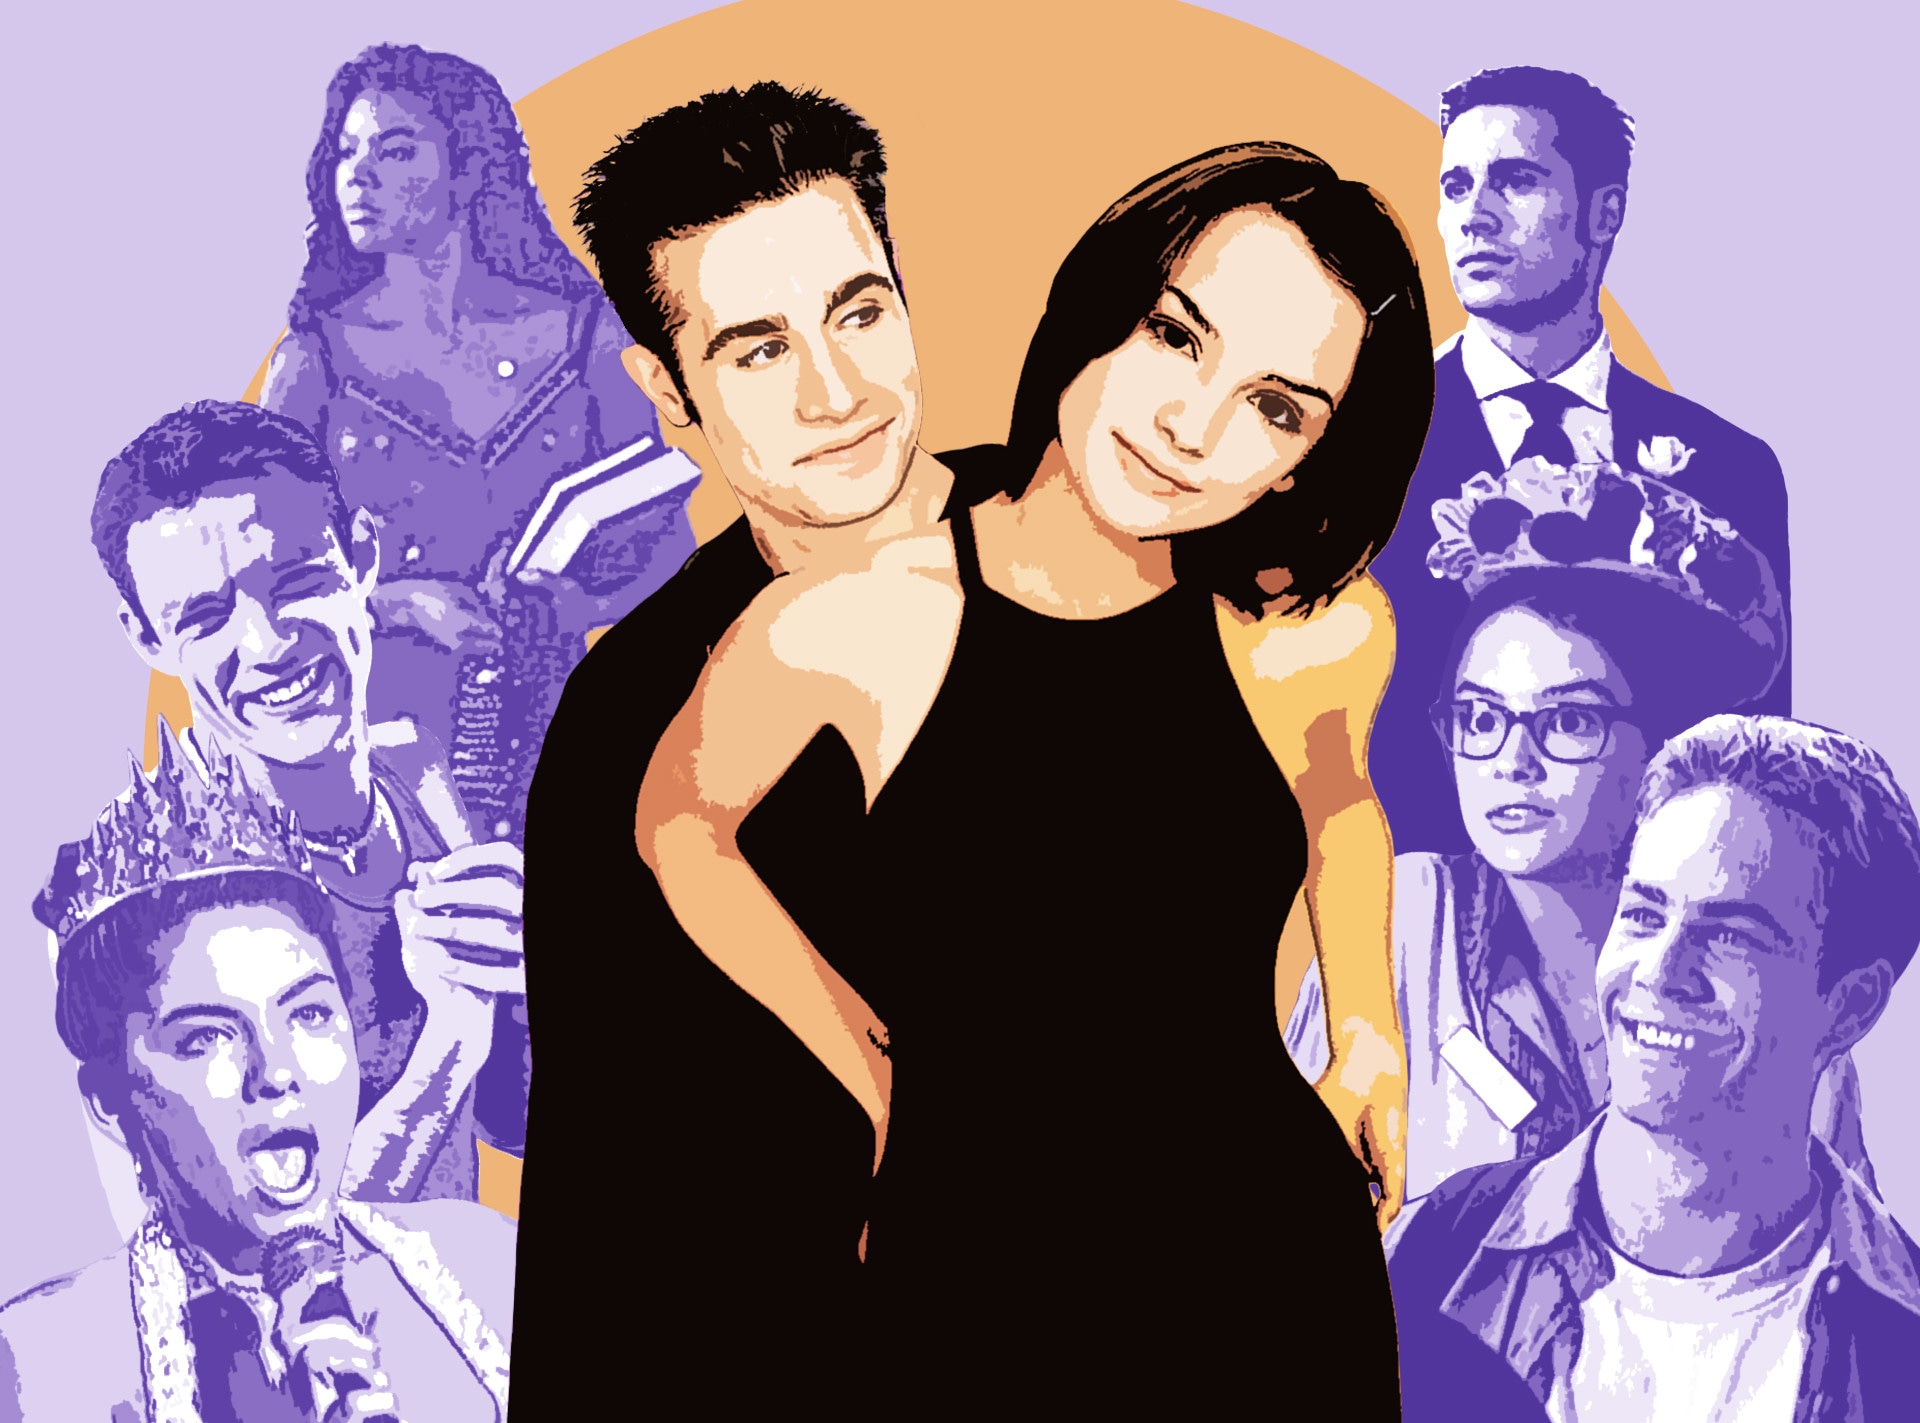 She's All That, 20th Anniversary